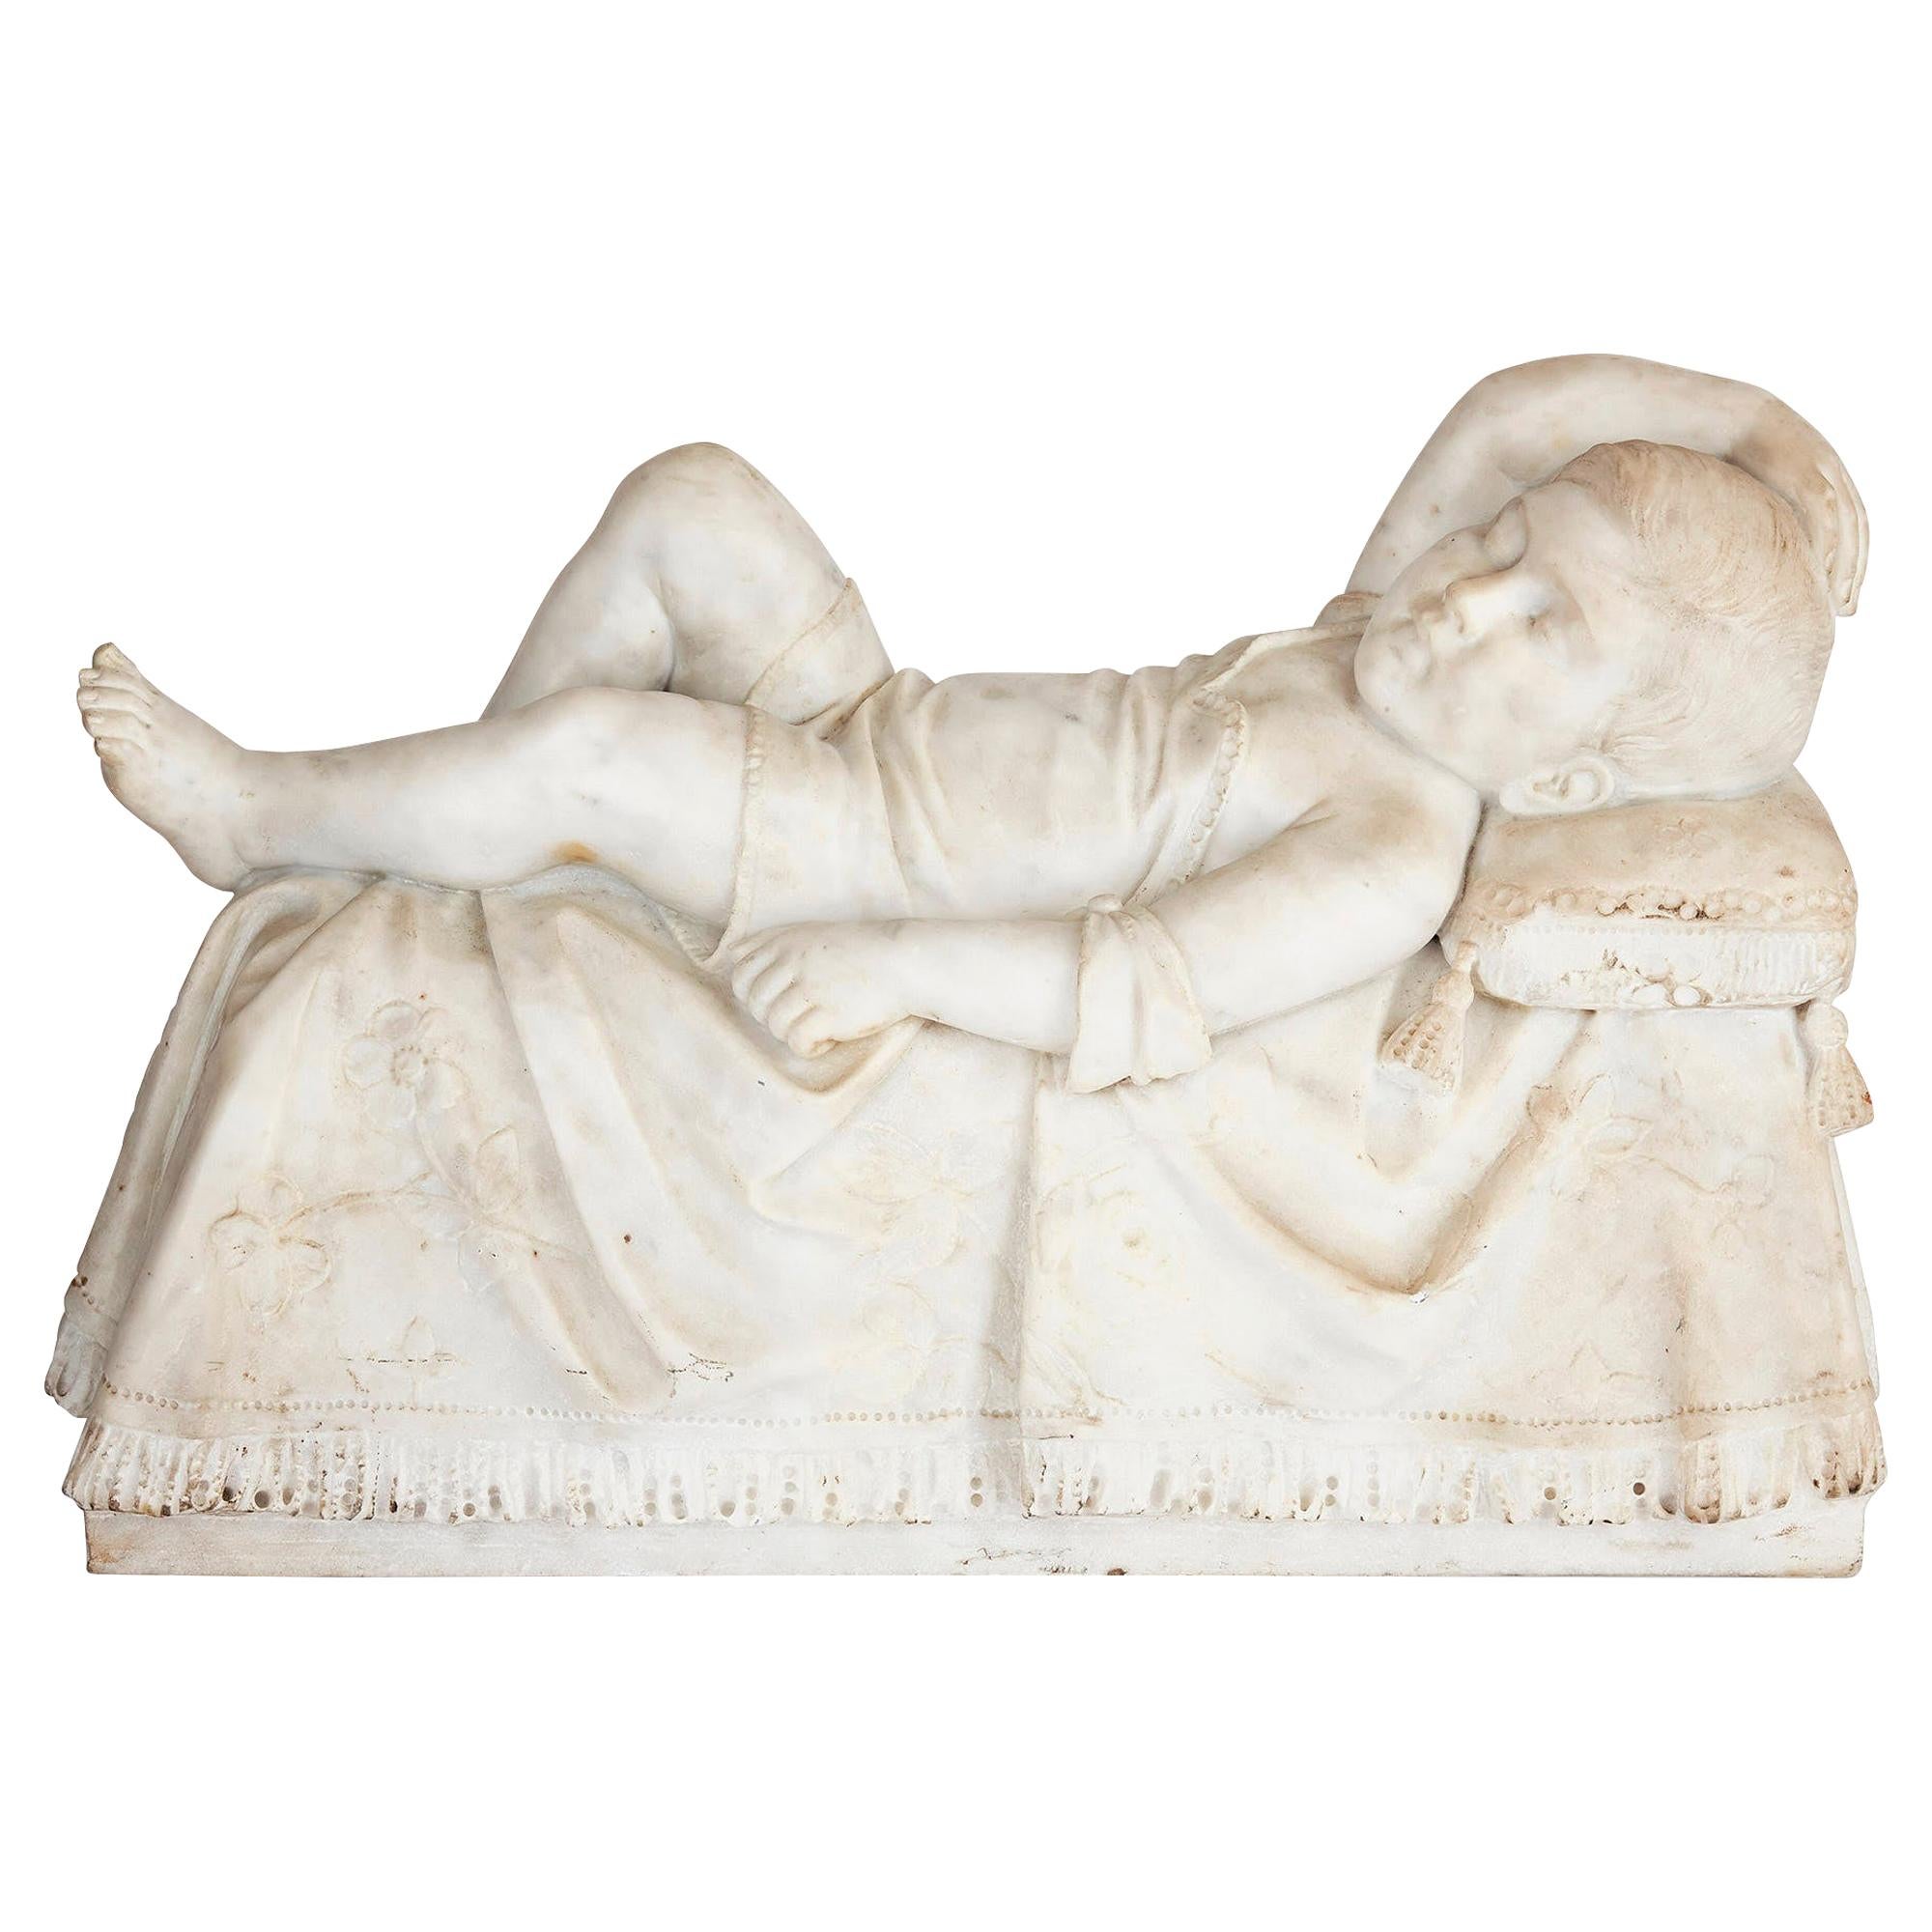 Antique 19th Century Italian Sculpture of a Sleeping Child For Sale